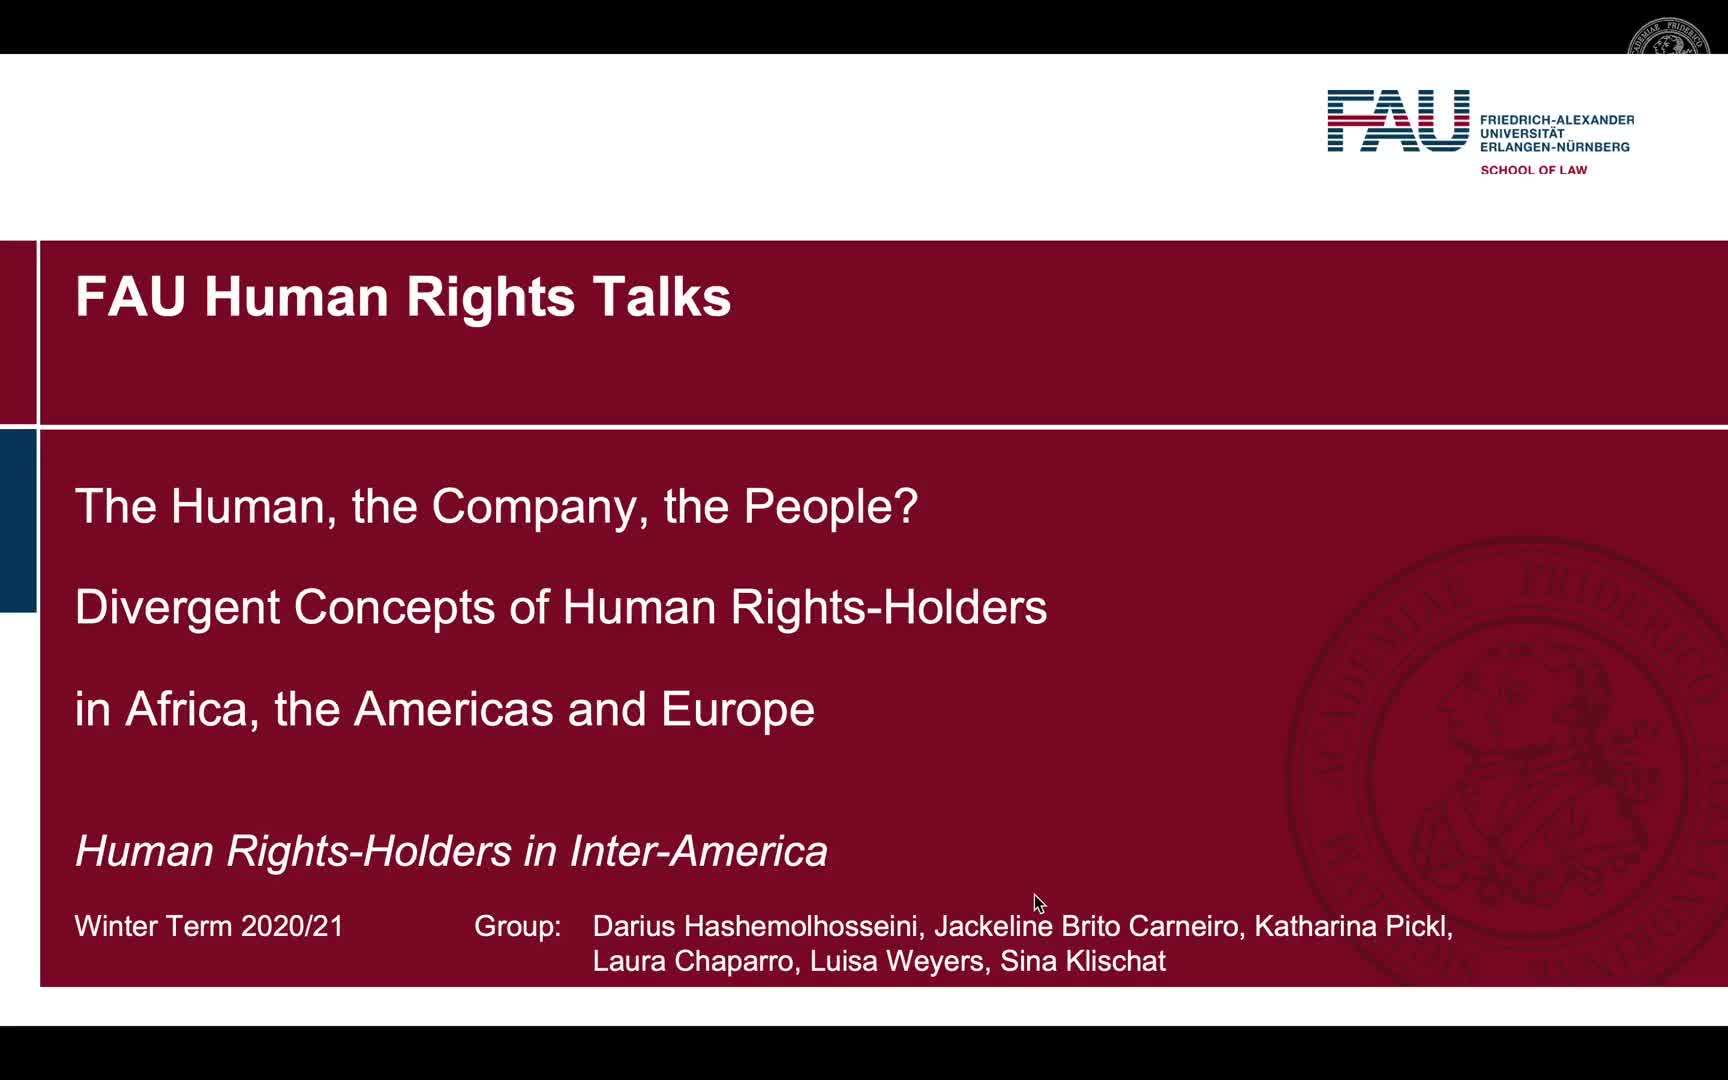 FAU Human Rights Talks Winter Term 2020 – Inter-American Human Rights System preview image